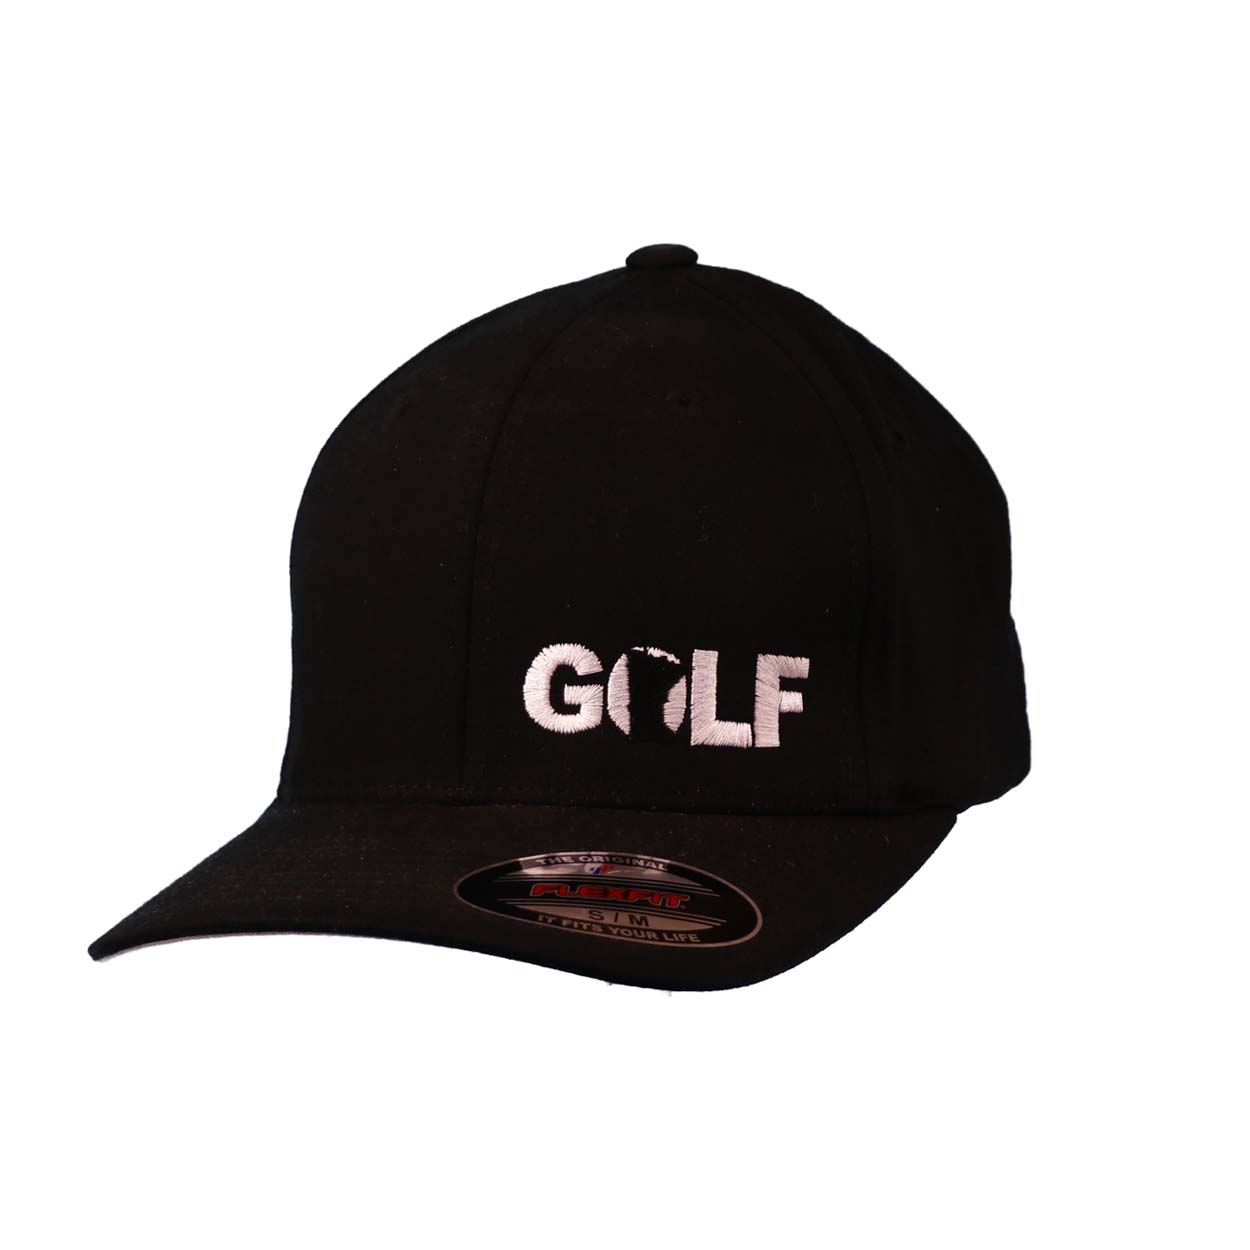 Golf Minnesota Night Out Embroidered Flex Fit Hat Black/White